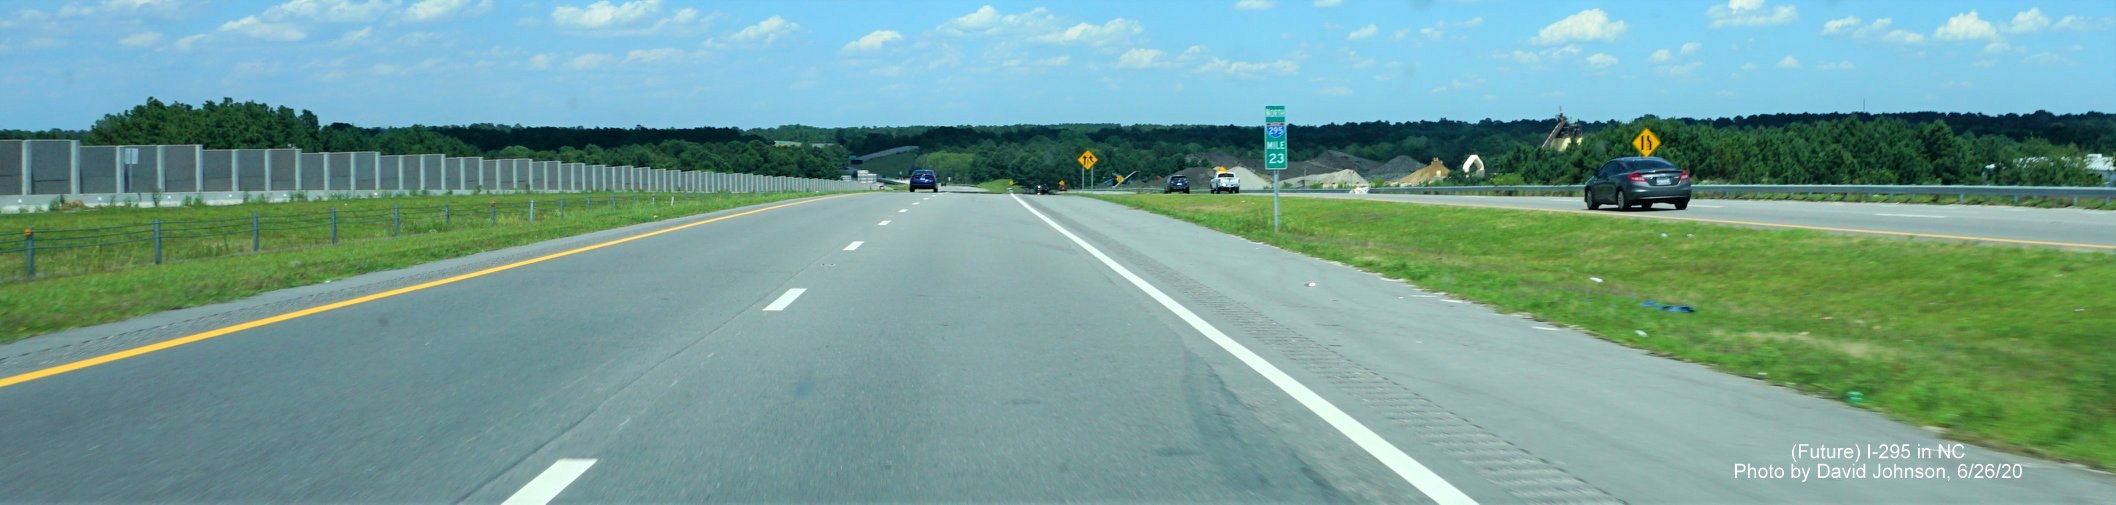 Image of the last North I-295 Mile marker after the Murchison Road exit, by David Johnson June 2020